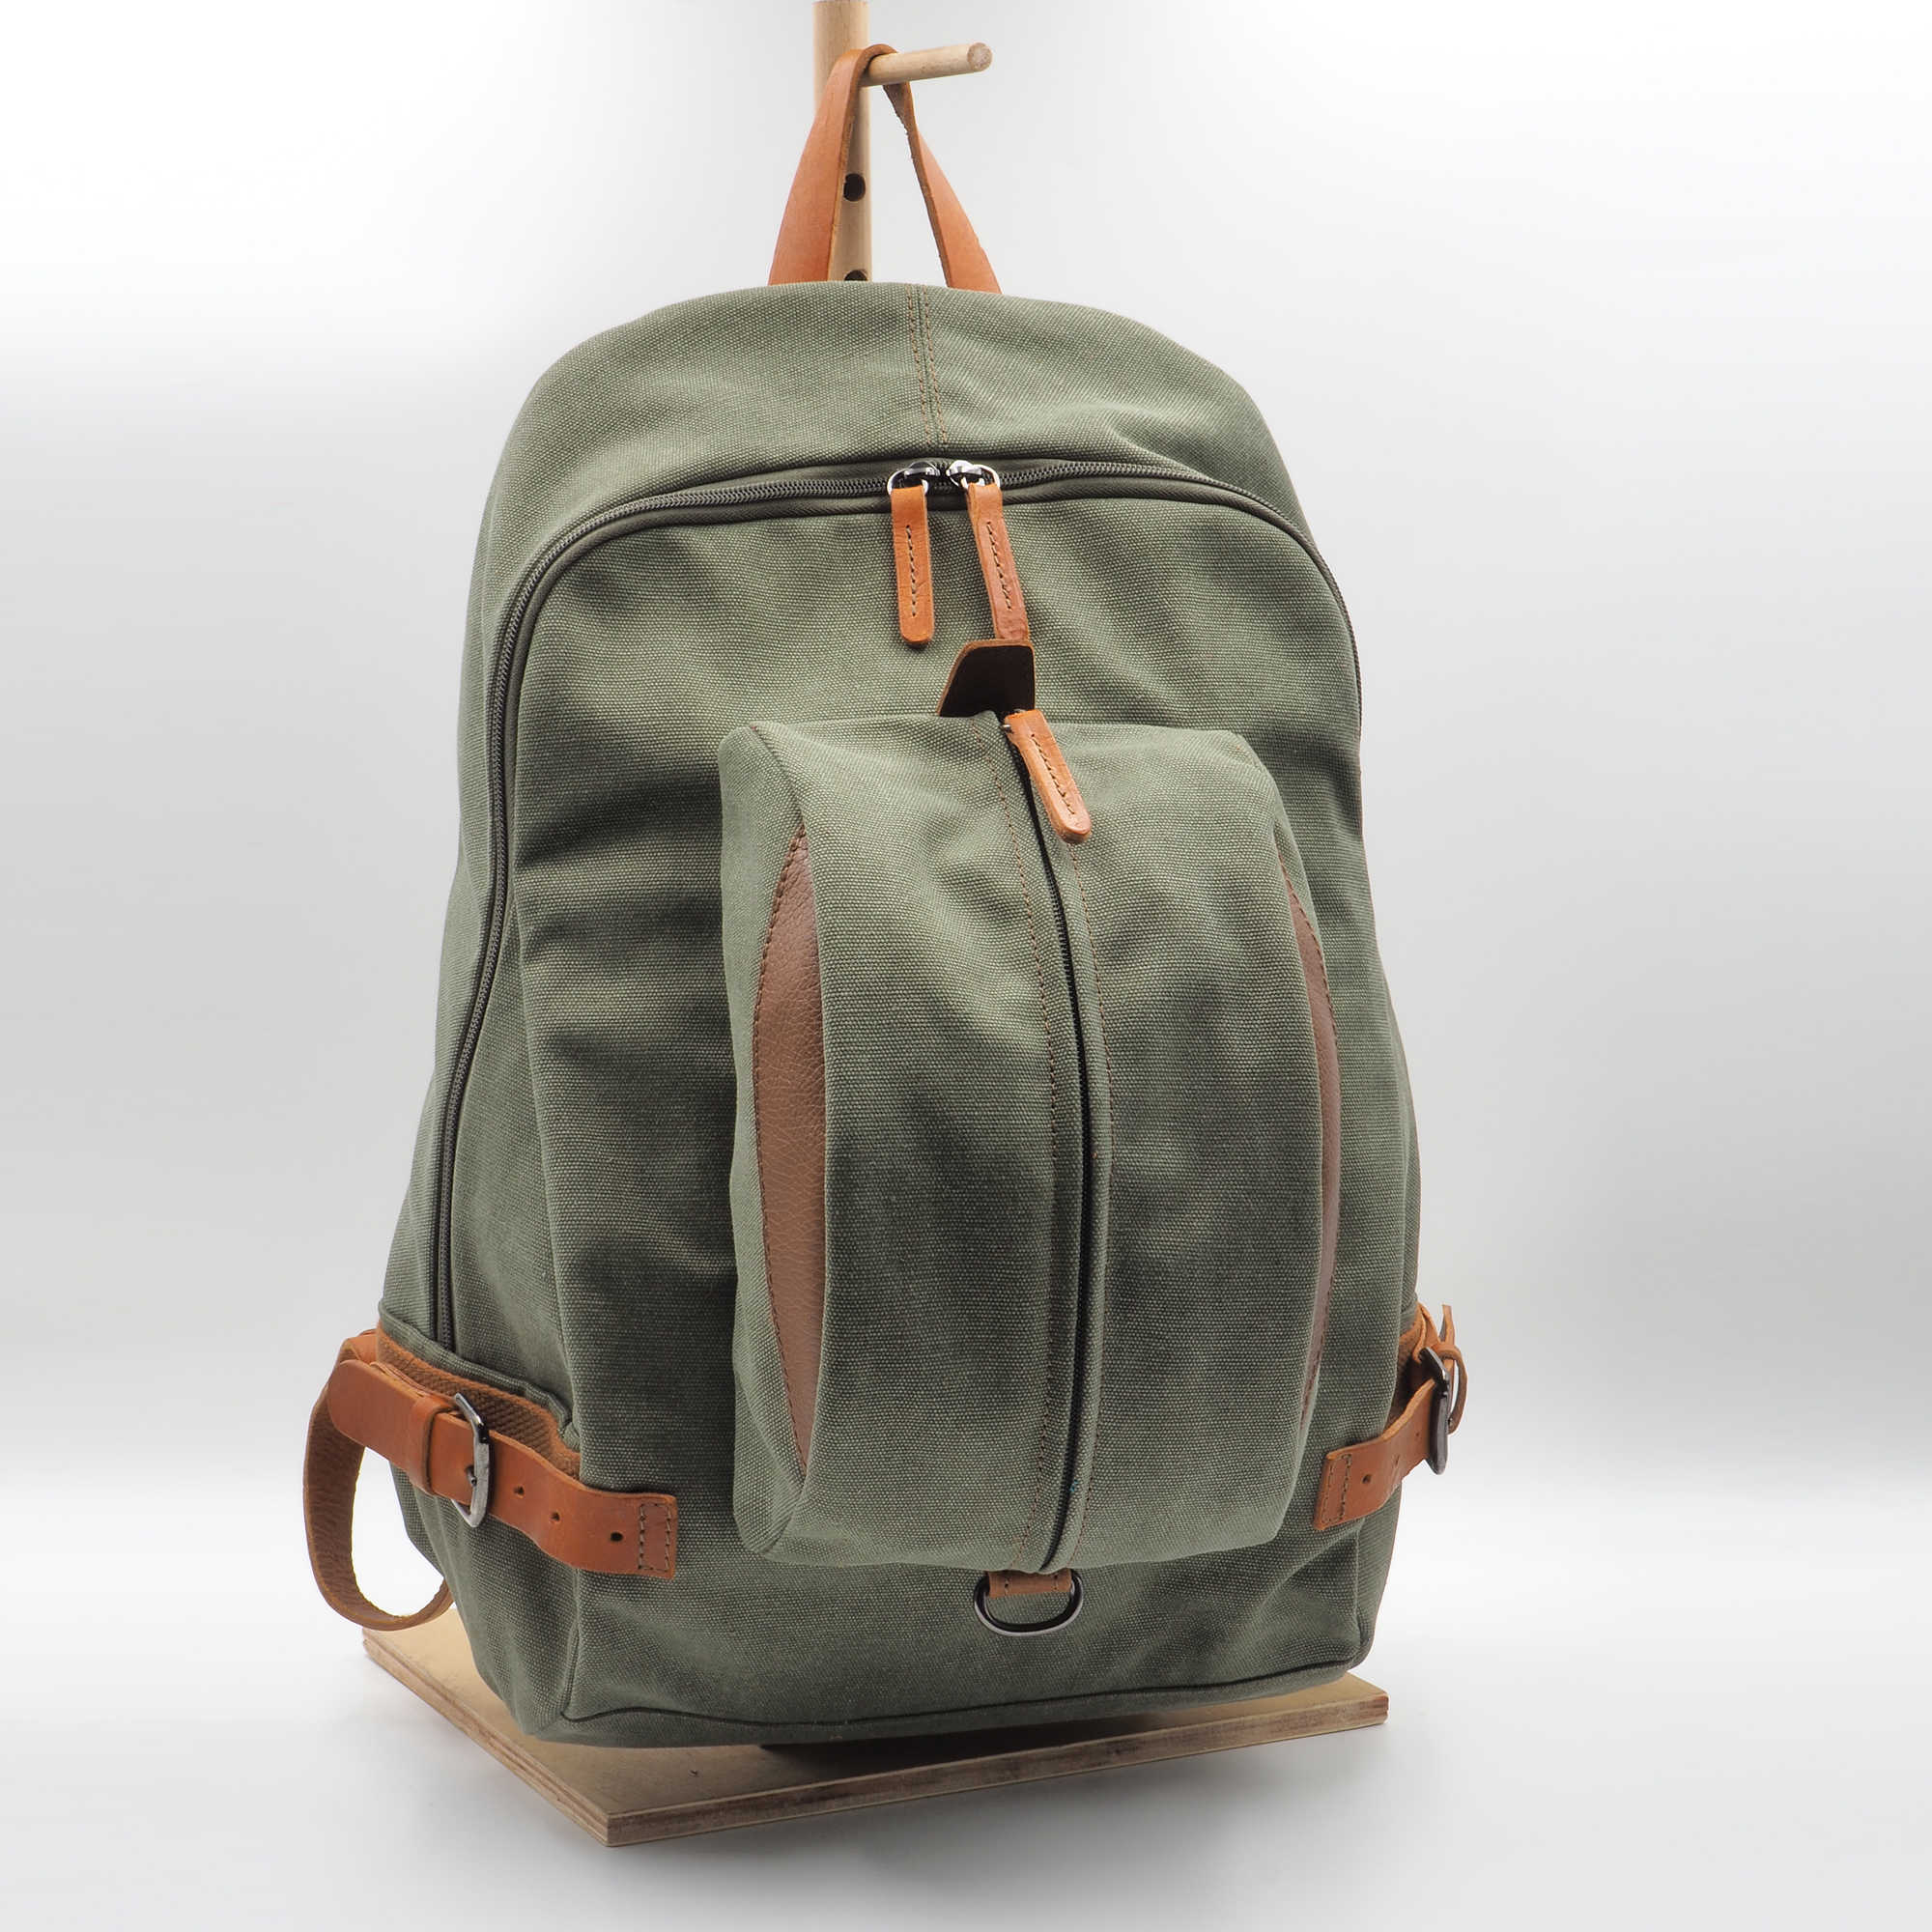 UNISEX BACKPACK CANVAS-LEATHER